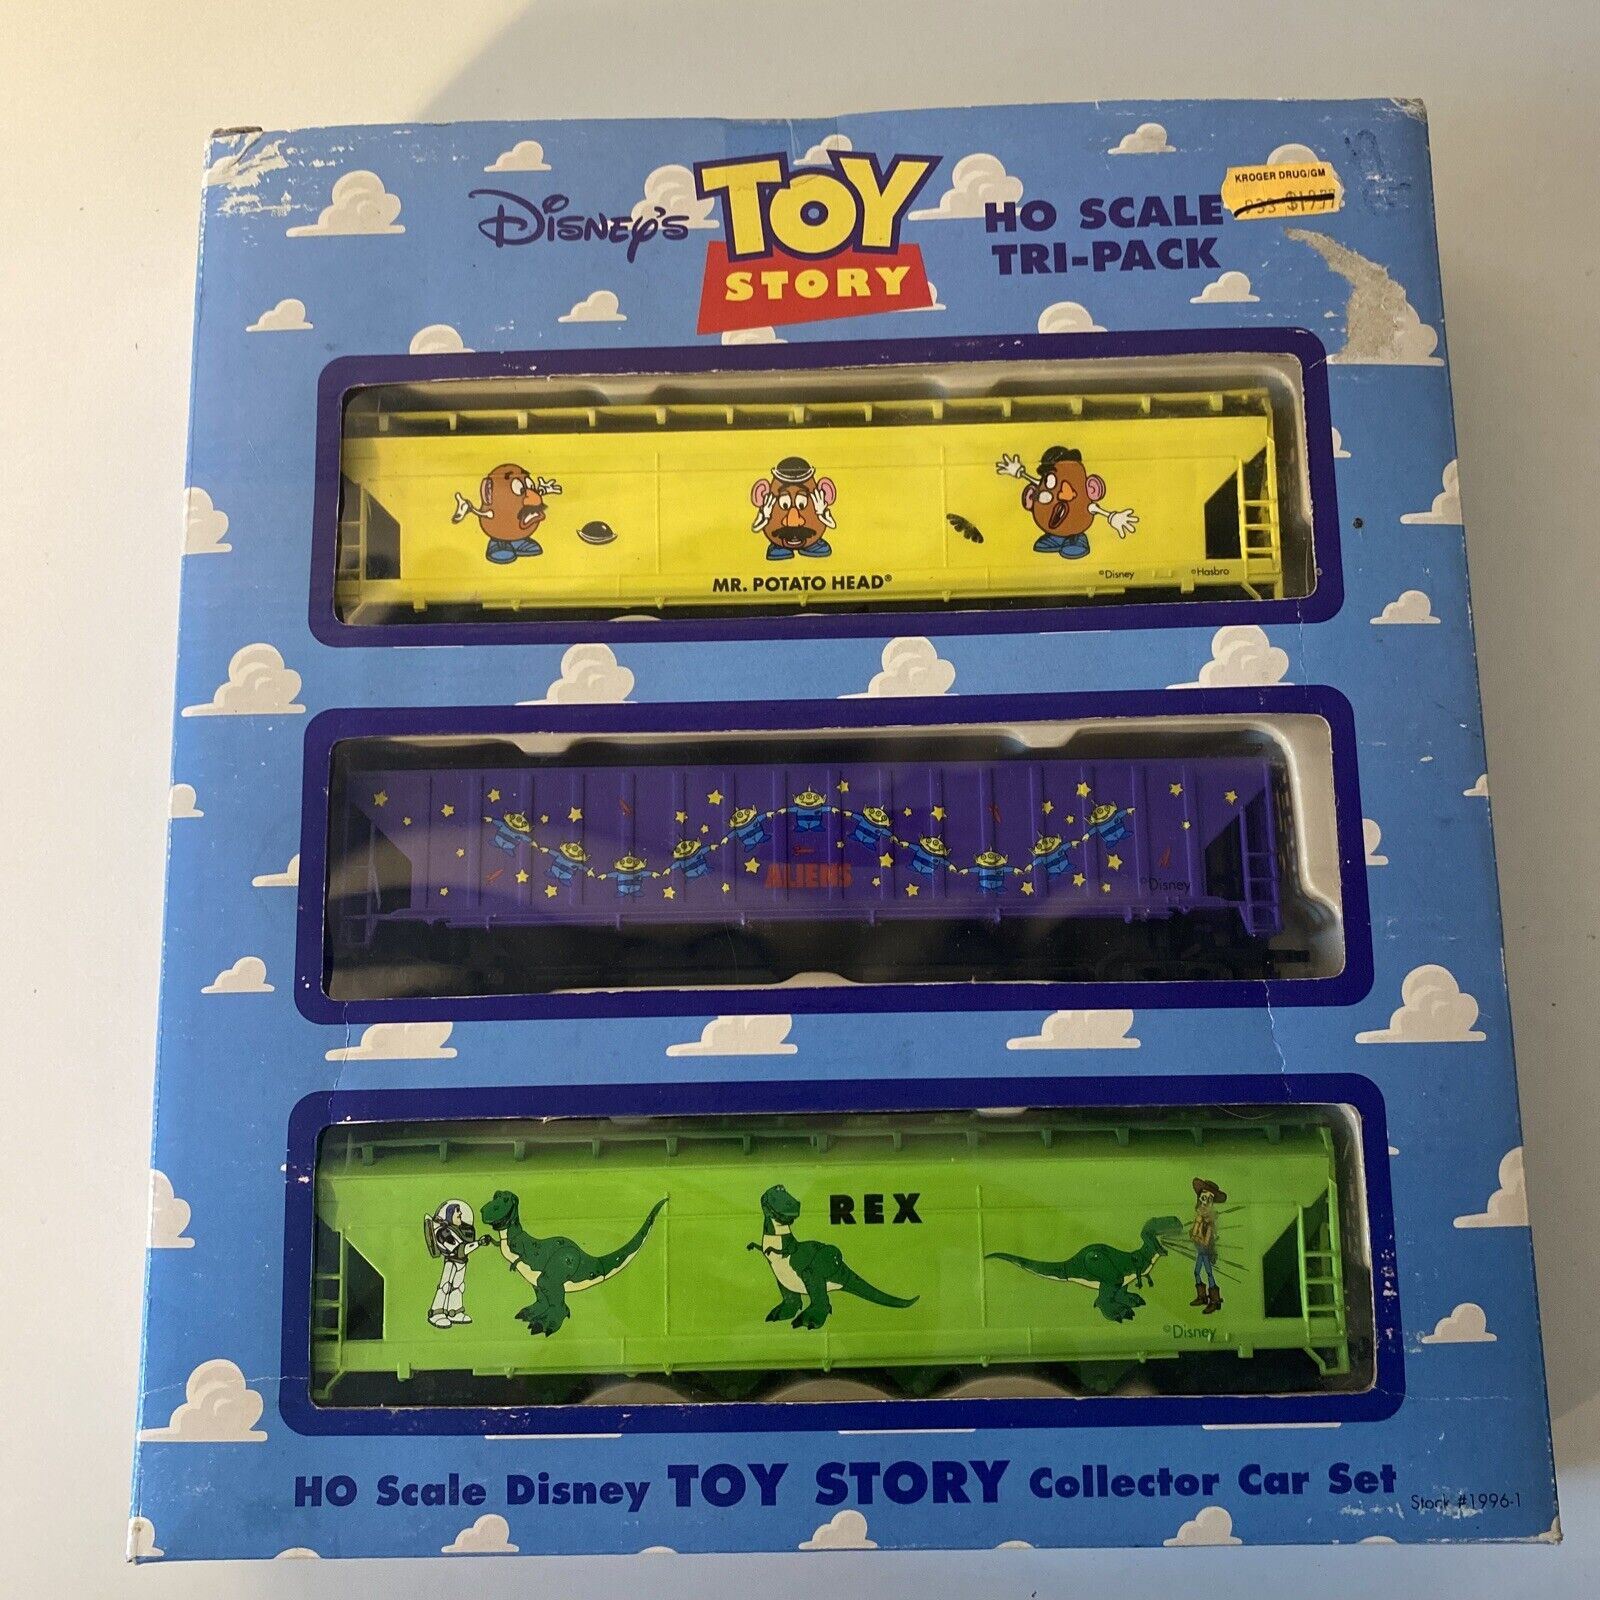 Vintage 1996 DISNEY\'S TOY STORY HO SCALE COLLECTOR Tri-Pack CAR SET New ALIENS